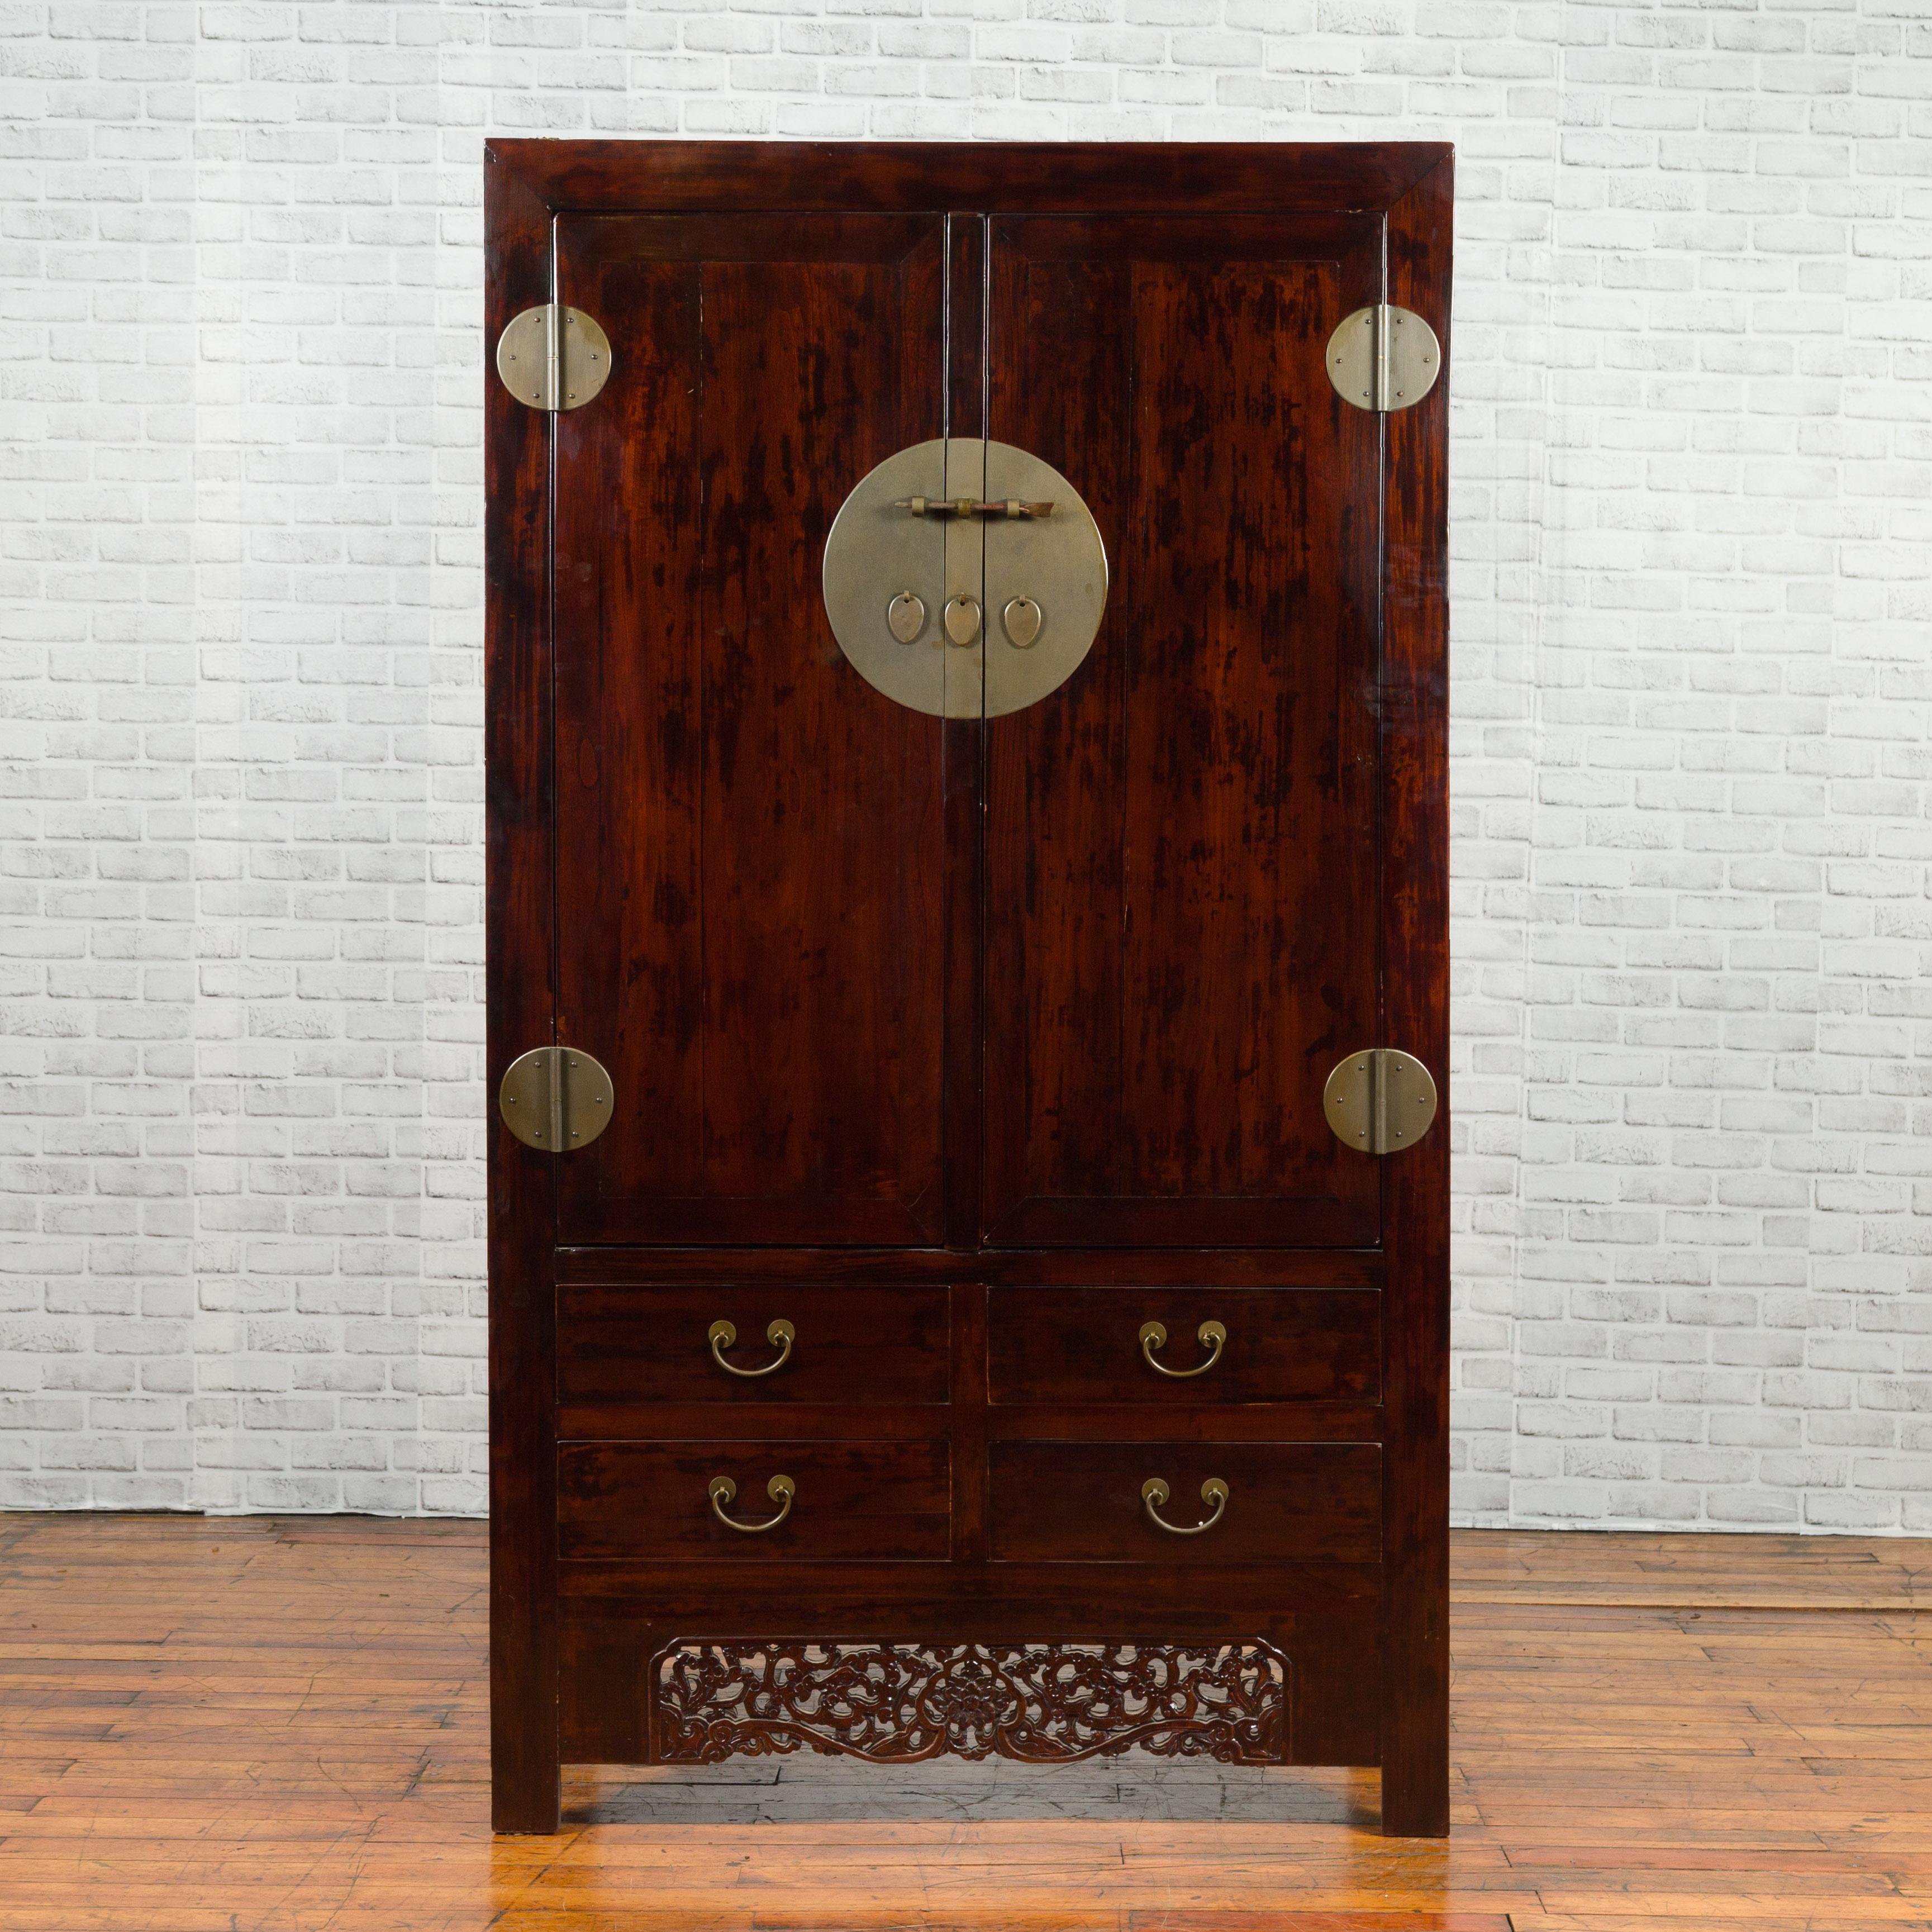 A Chinese Qing Dynasty period brown cabinet from the 19th century, with round medallion brass hardware, carved apron and four drawers. Created in China during the Qing Dynasty, this cabinet features a linear silhouette perfectly complimented by a